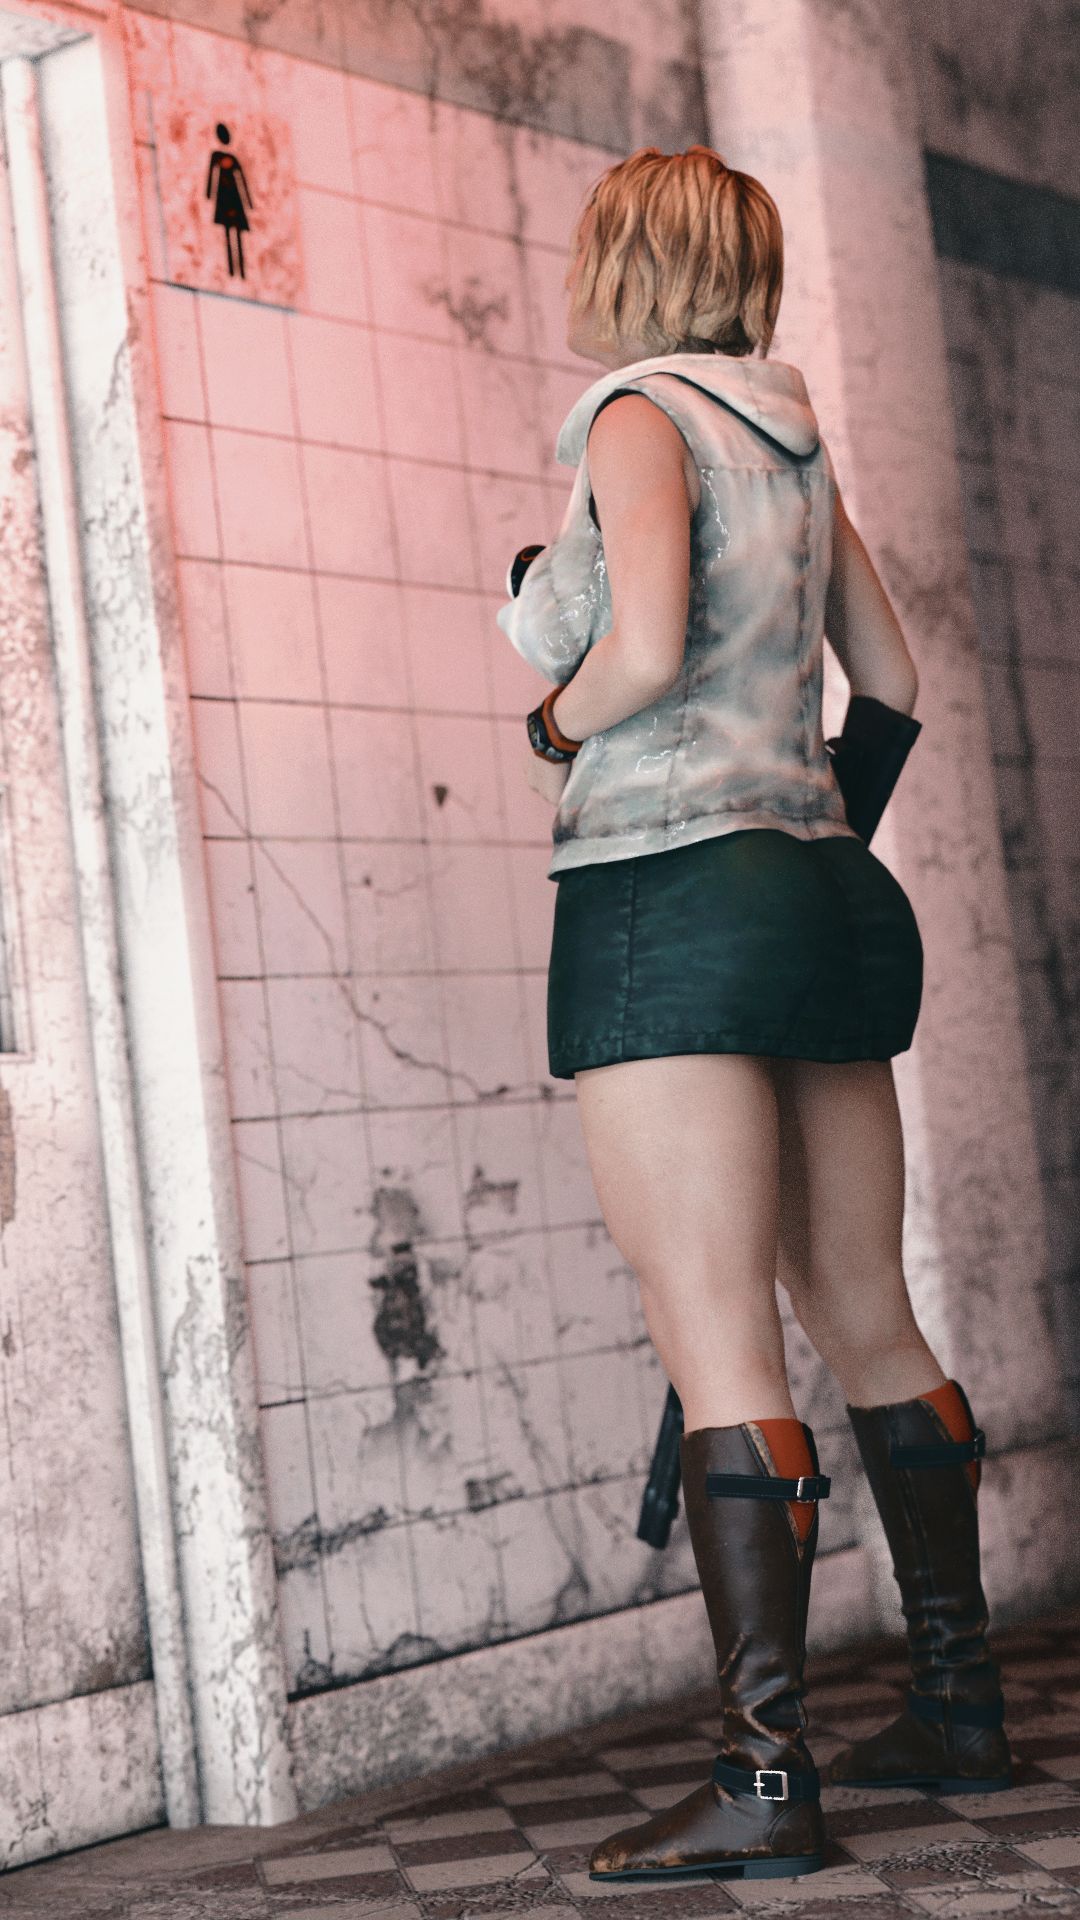 [Renö] Heather at the Gloryholes (Silent Hill) 1